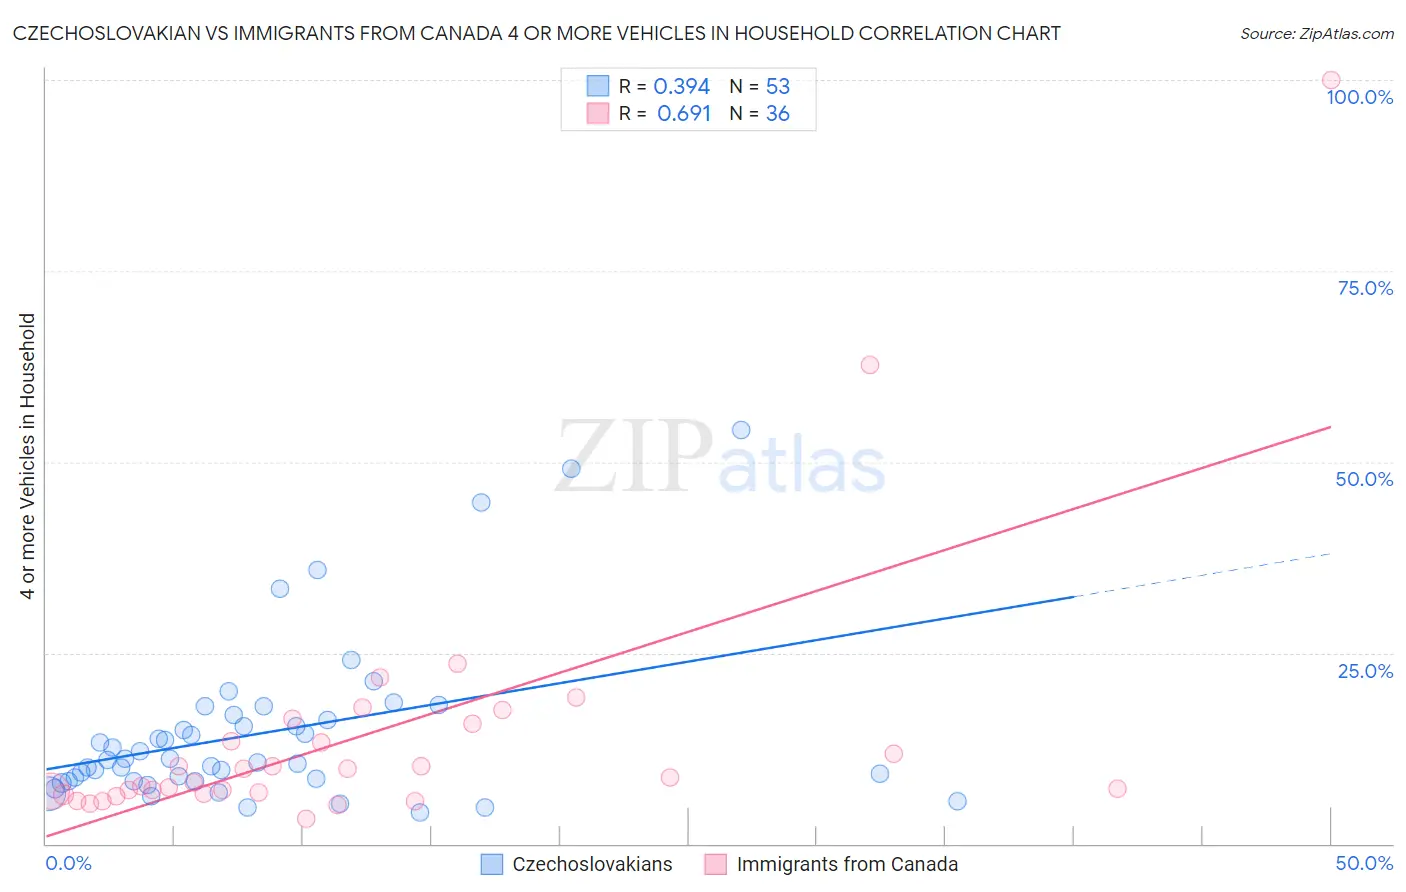 Czechoslovakian vs Immigrants from Canada 4 or more Vehicles in Household